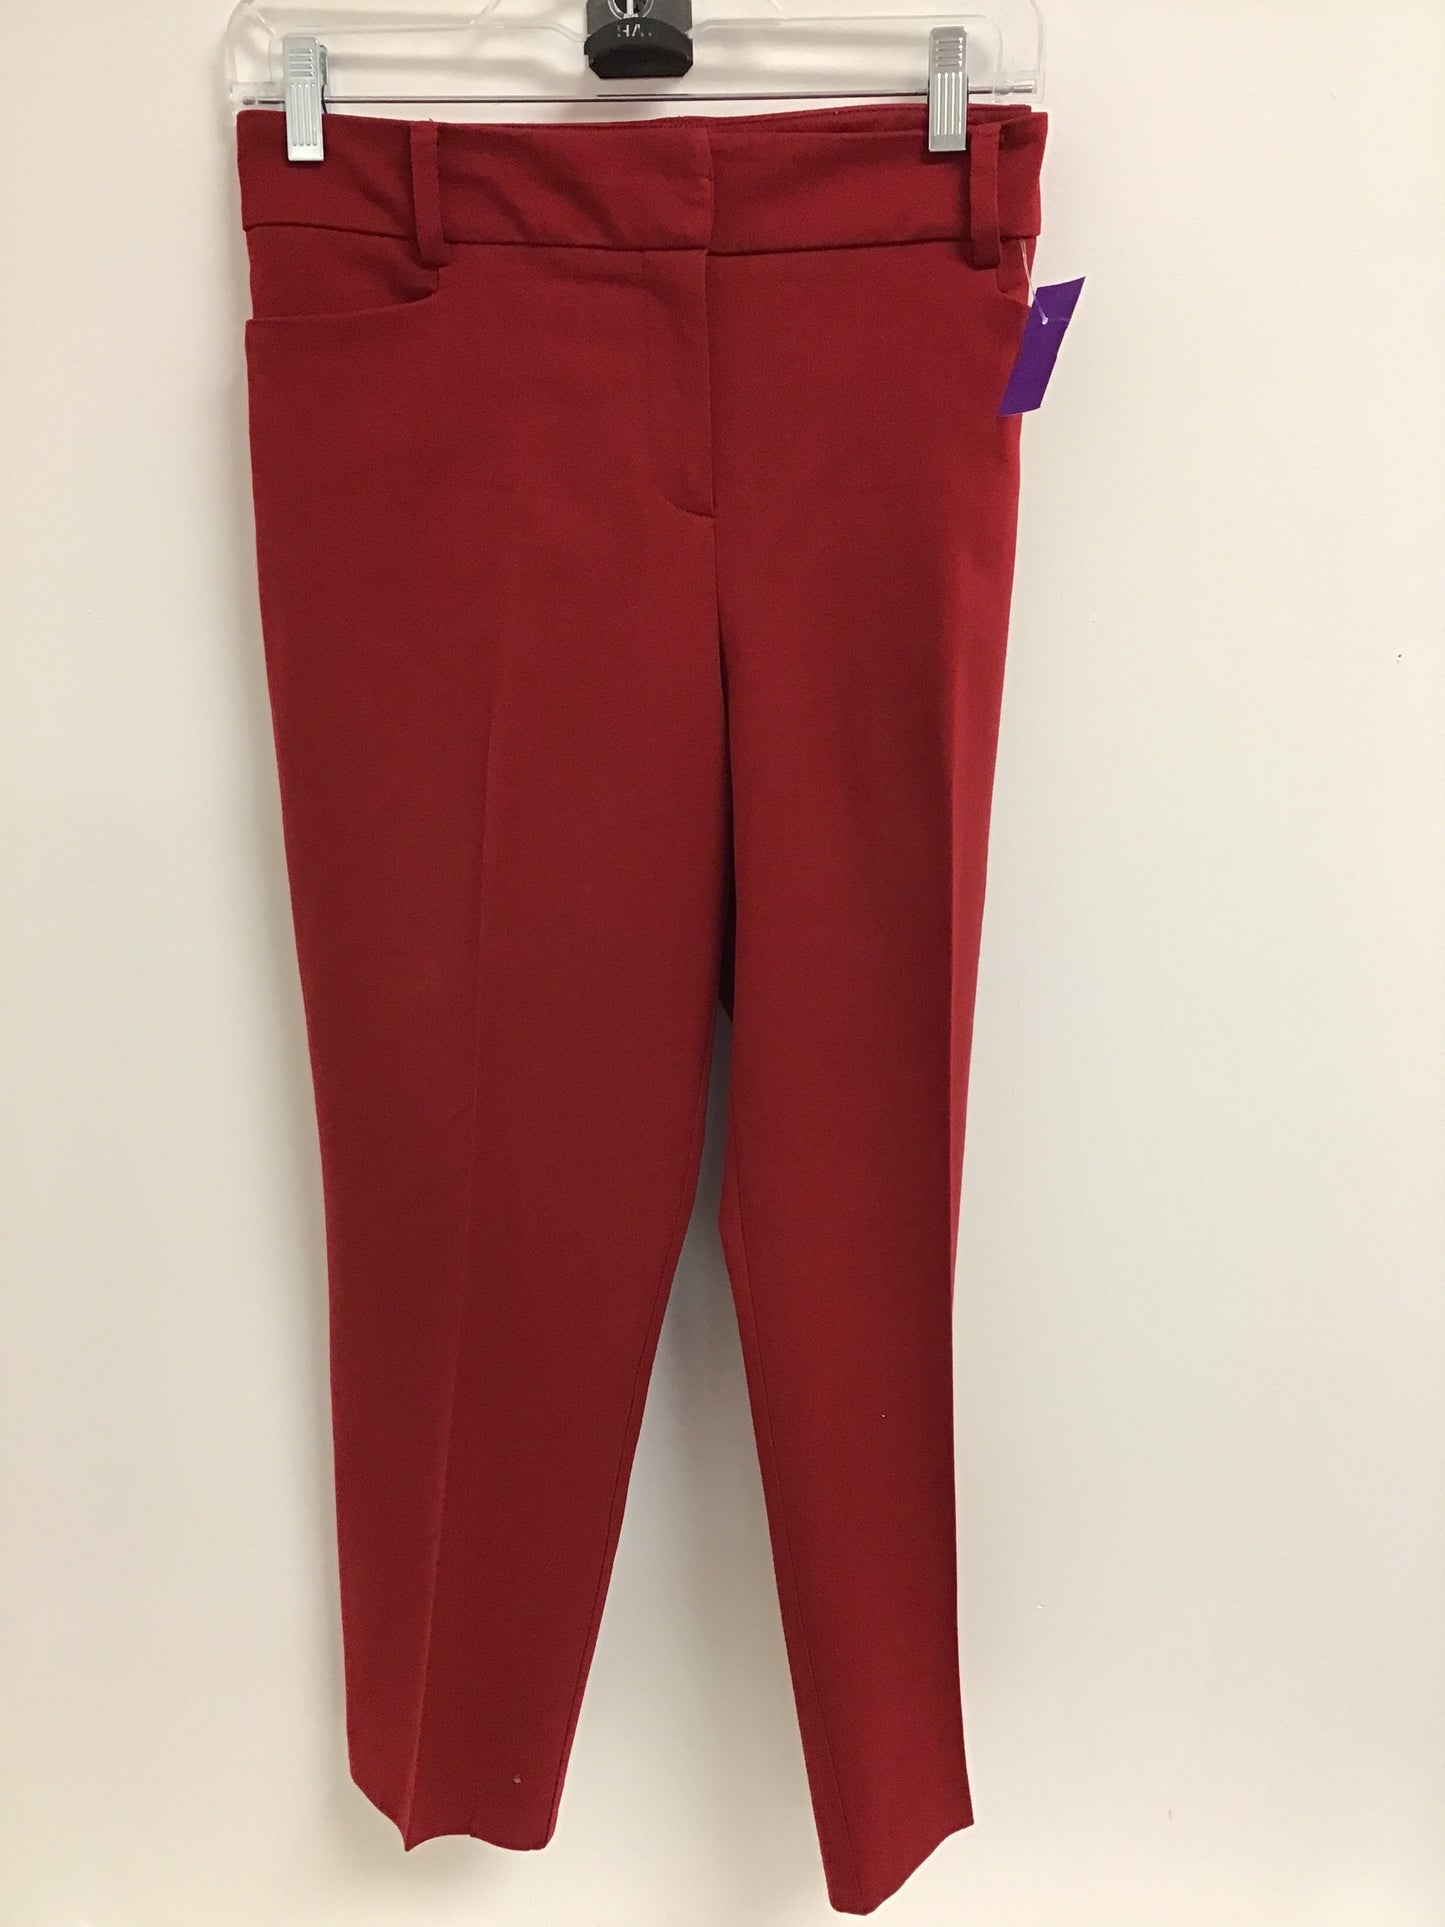 Red Pants Other New York And Co, Size 12